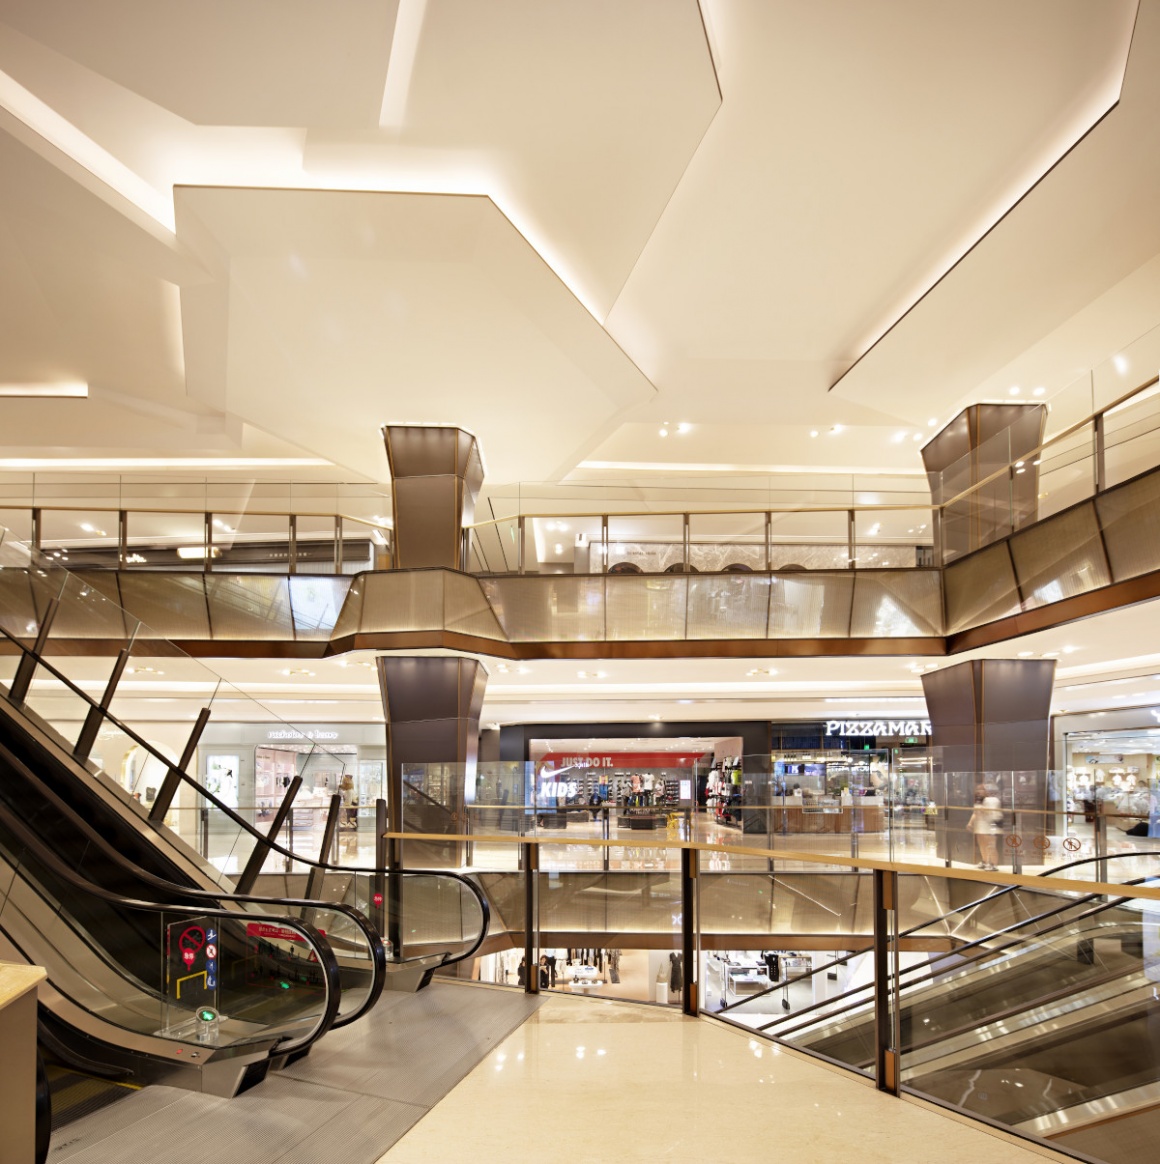 The interior of a shopping center with modern design...